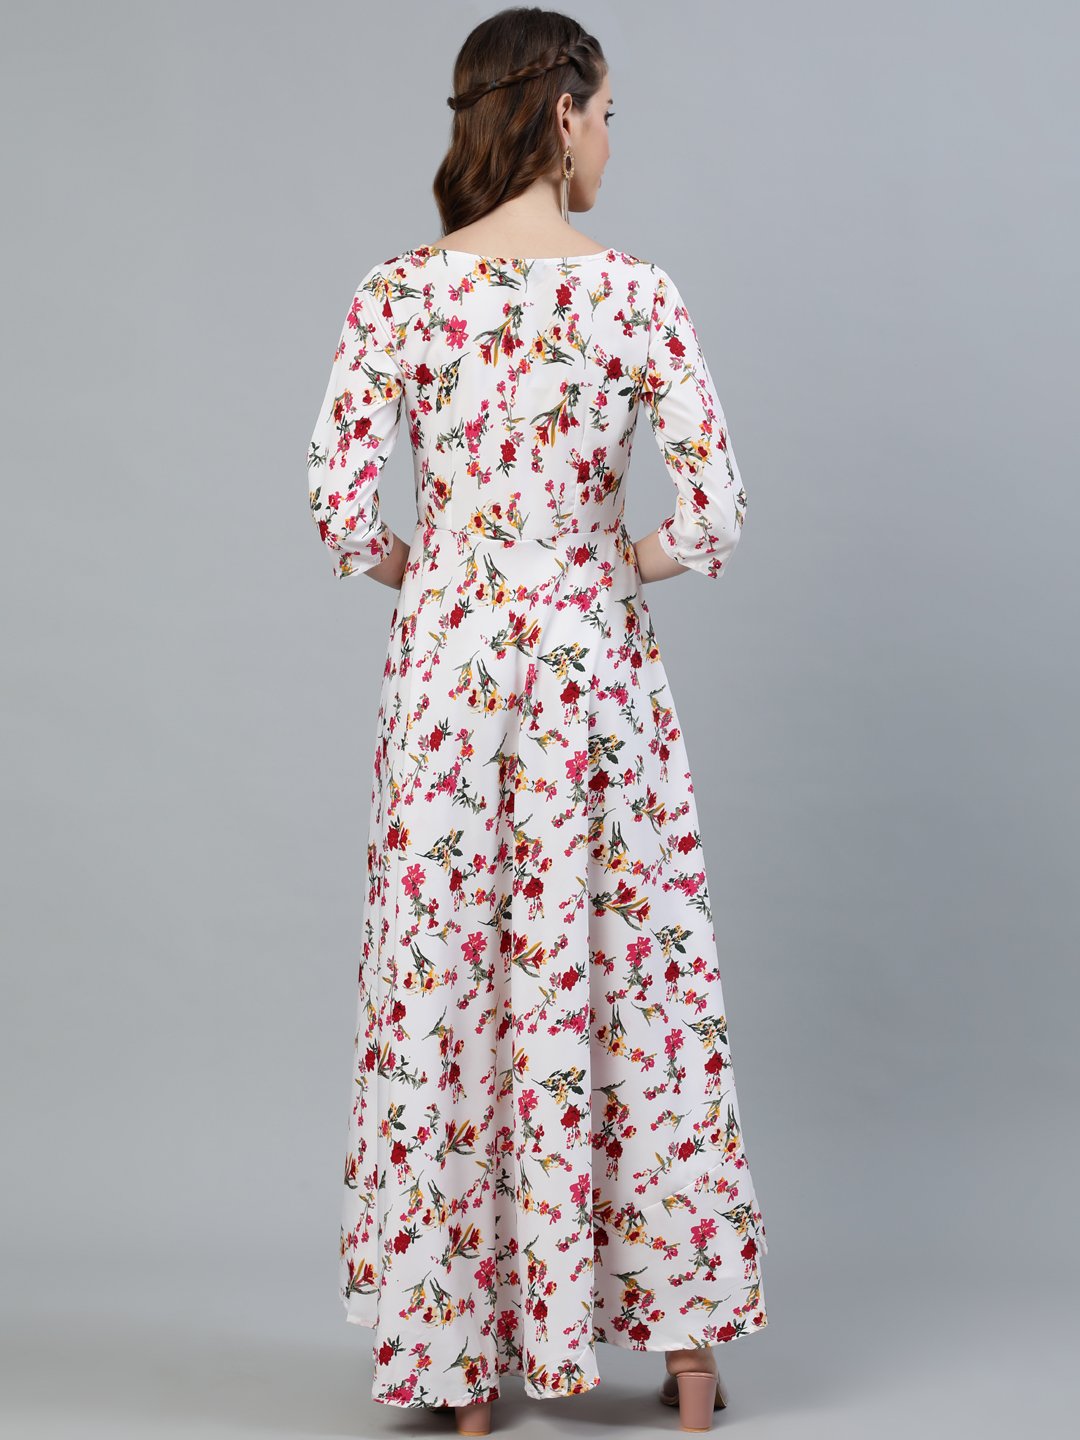 Women's Off-White Floral Printed Maxi Dress With Three Quarter Sleeves - Nayo Clothing